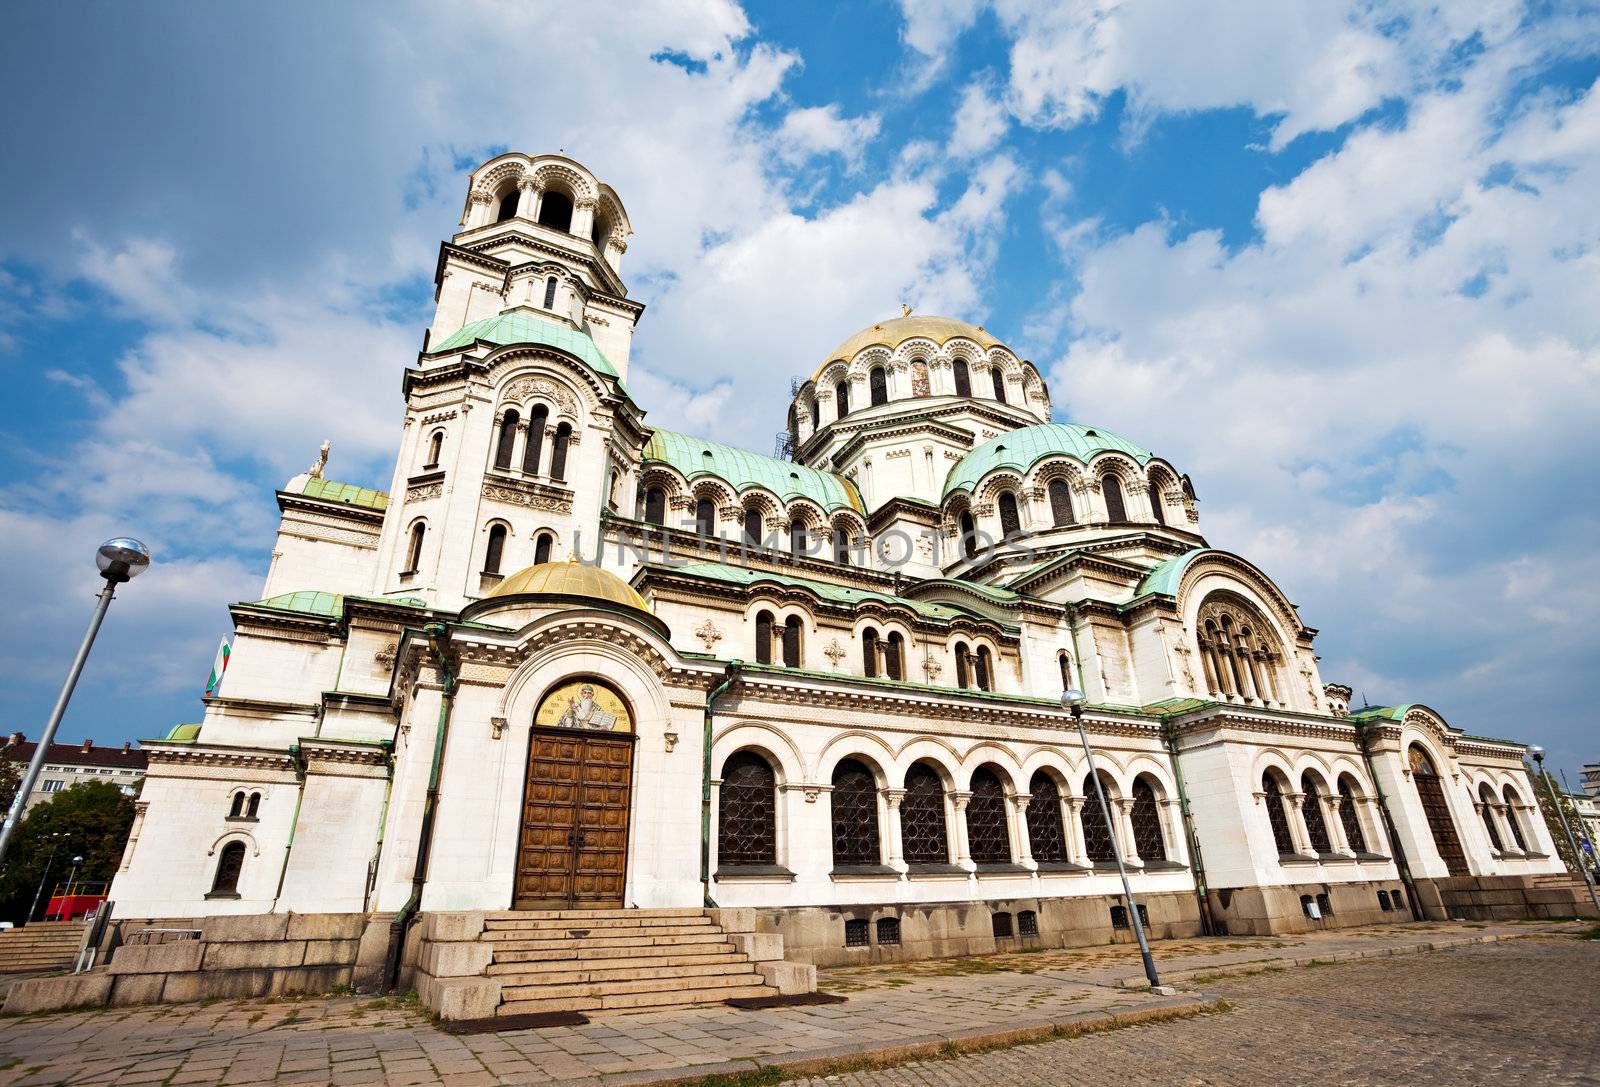 side view of svety Alexander Nevsky cathedral in Sofia